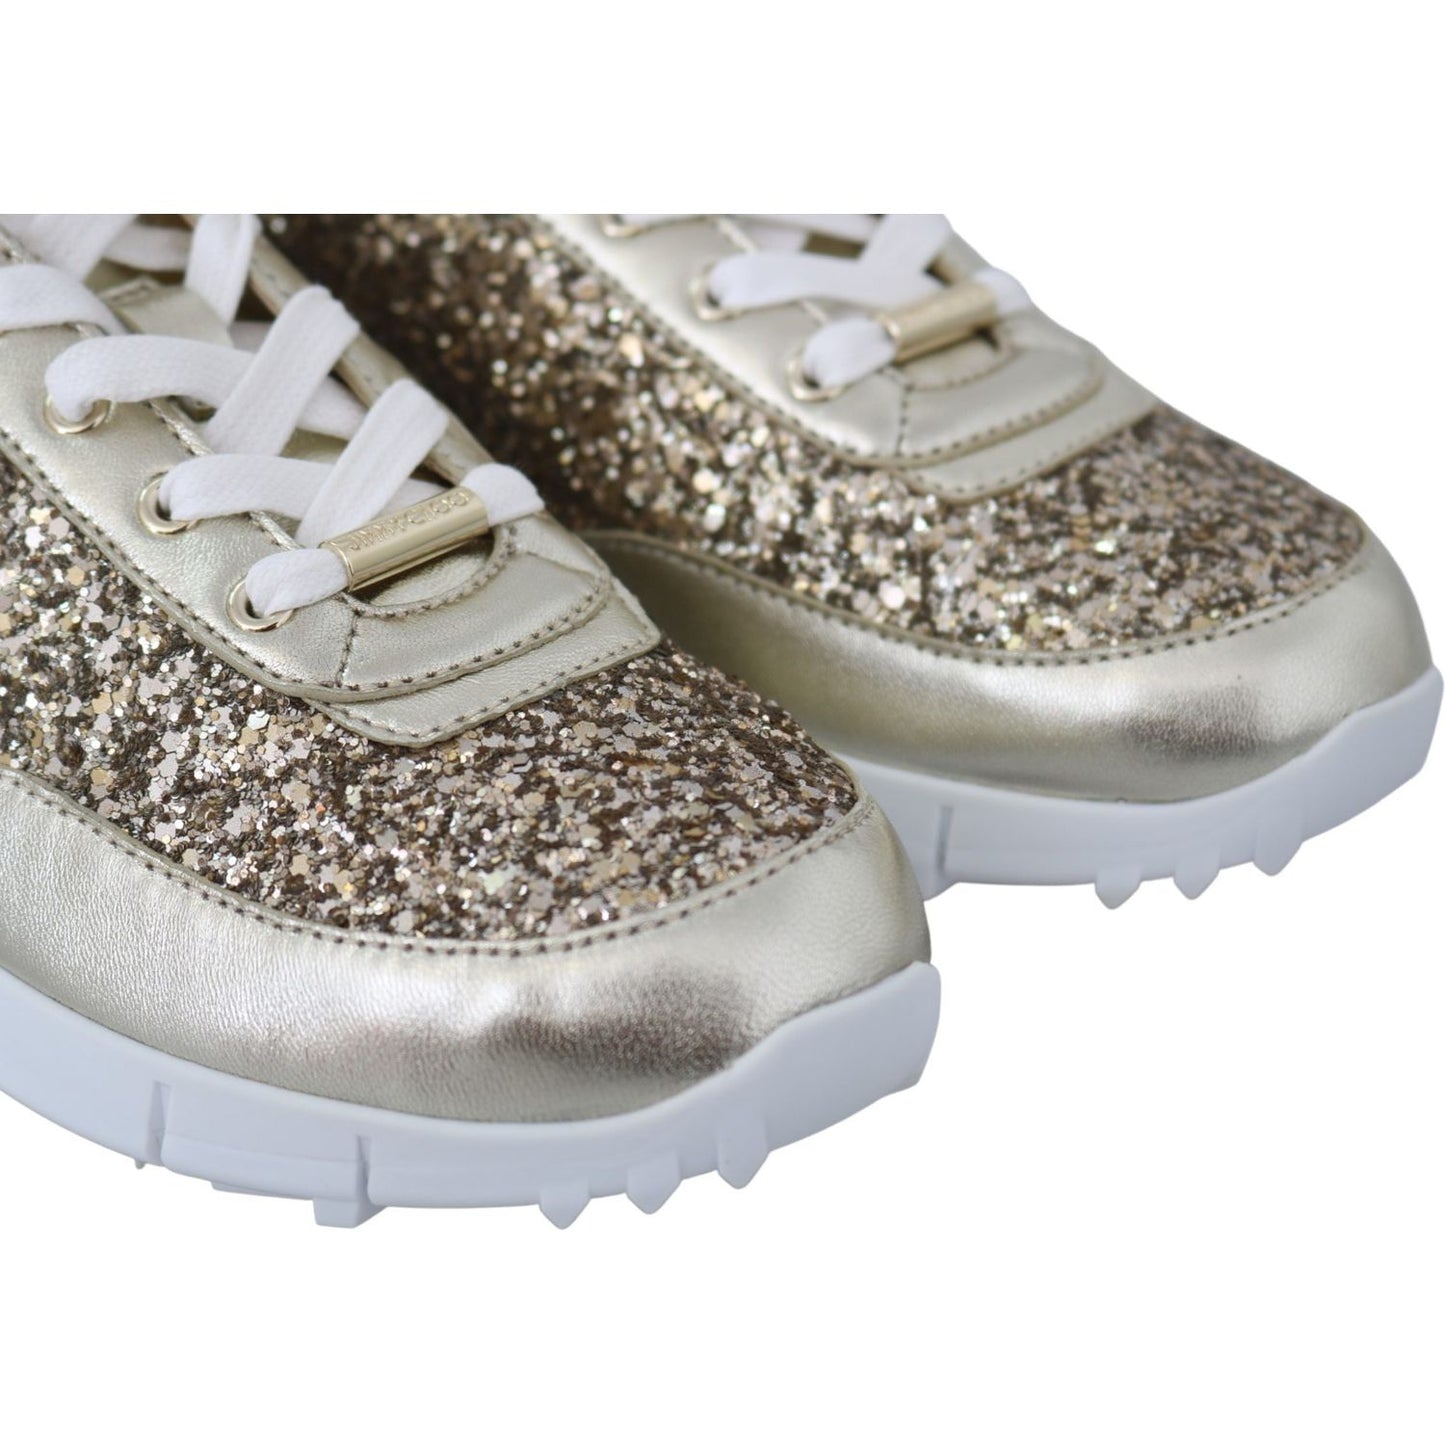 Jimmy Choo Antique Gold Glitter Leather Sneakers monza-antique-gold-leather-sneakers